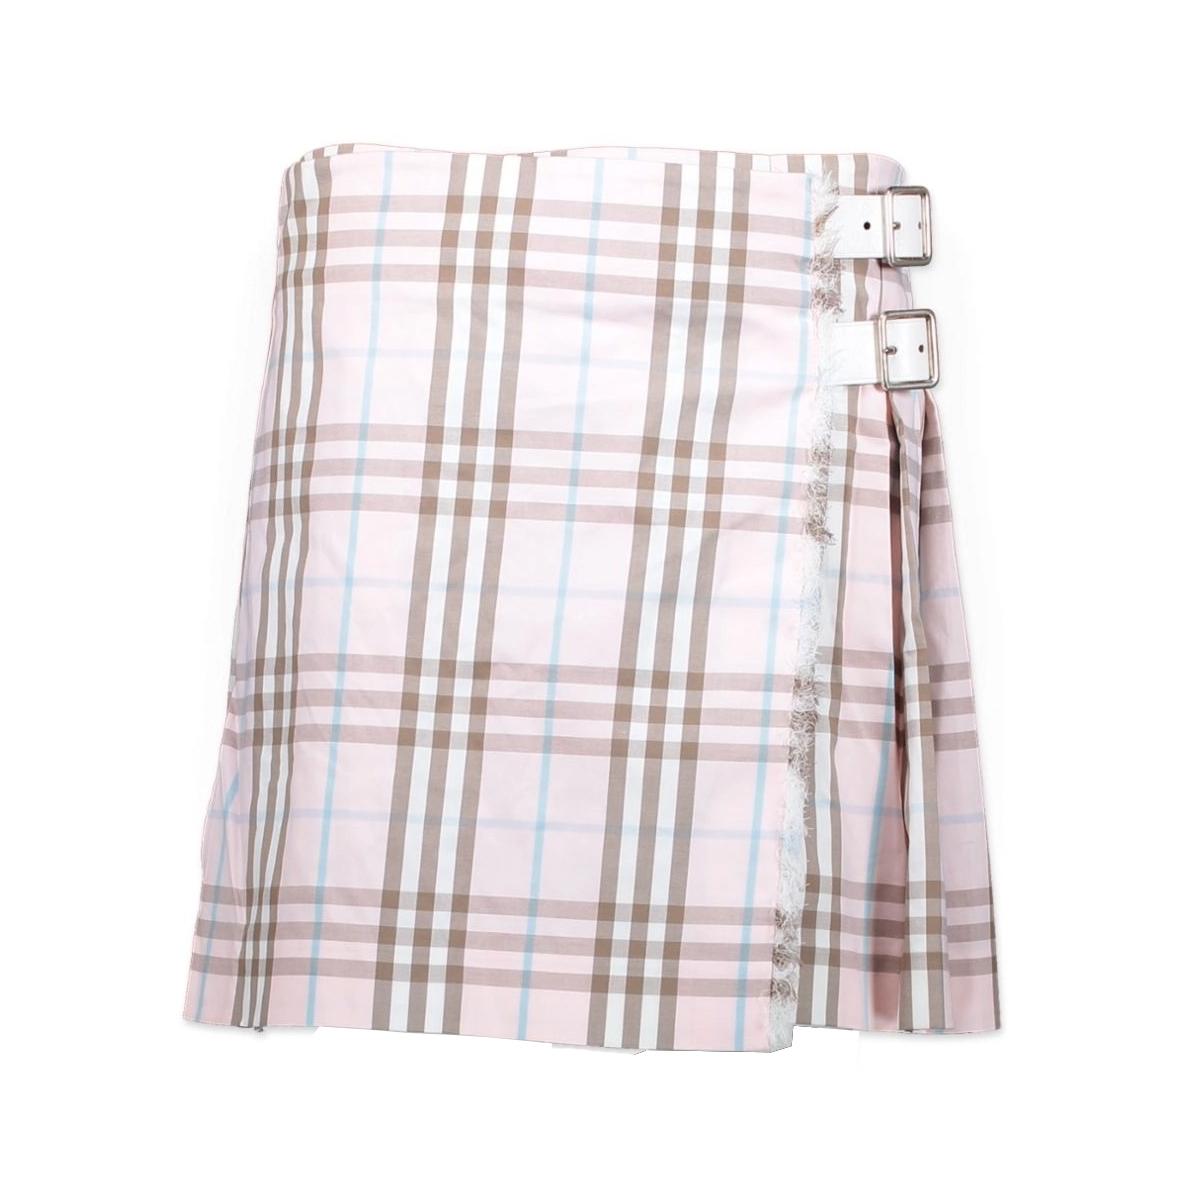 Burberry Pleated Pink Mini Skirt - Size 